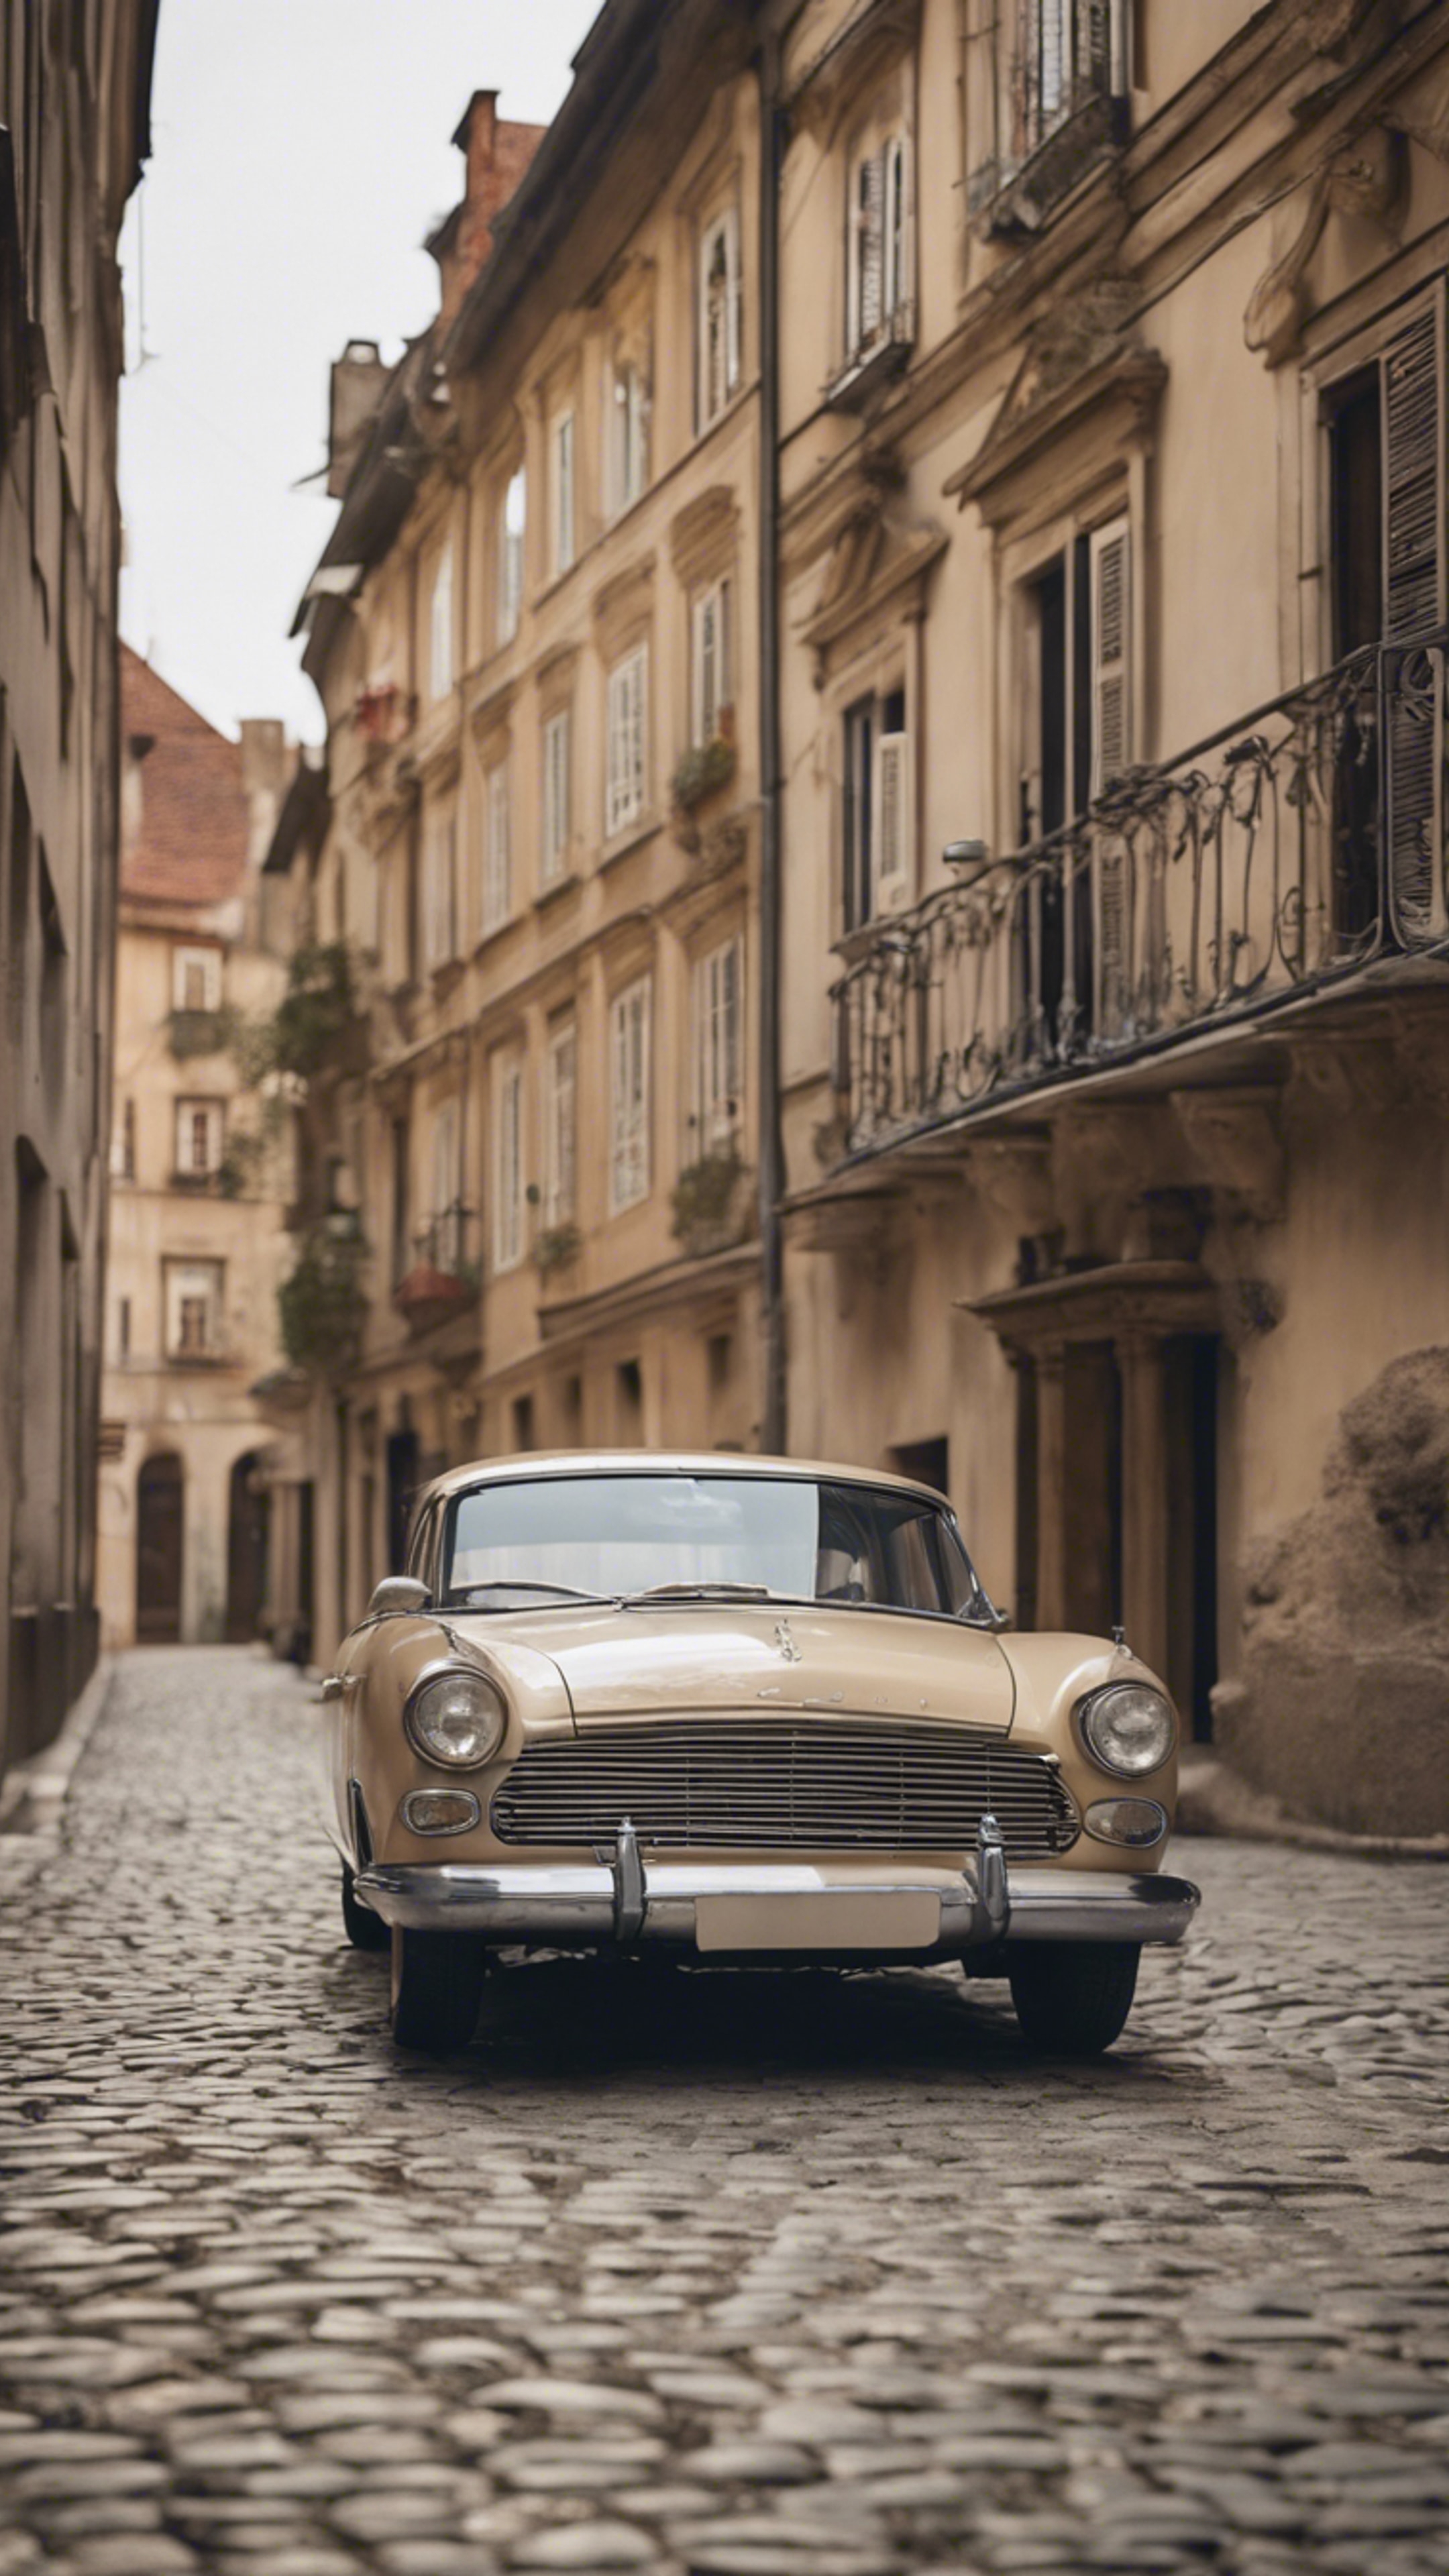 A beige classic car parked on a cobblestone street with rustic buildings in the background. 牆紙[31a873a8b96b4be69c6a]